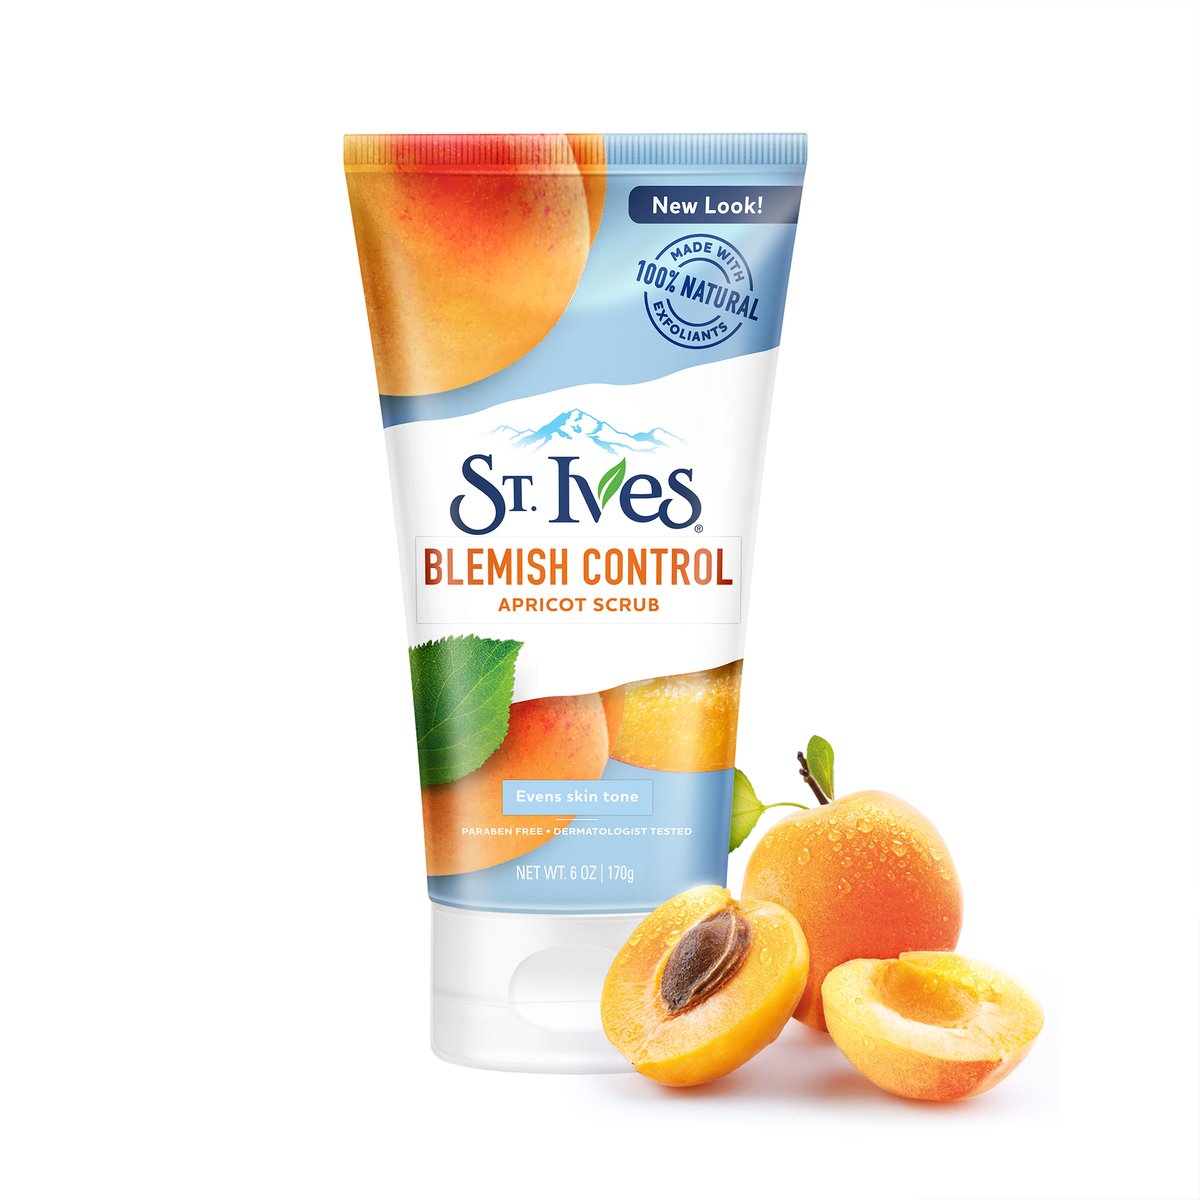 St. Ives Blemish Control Apricot Face Scrub 170g